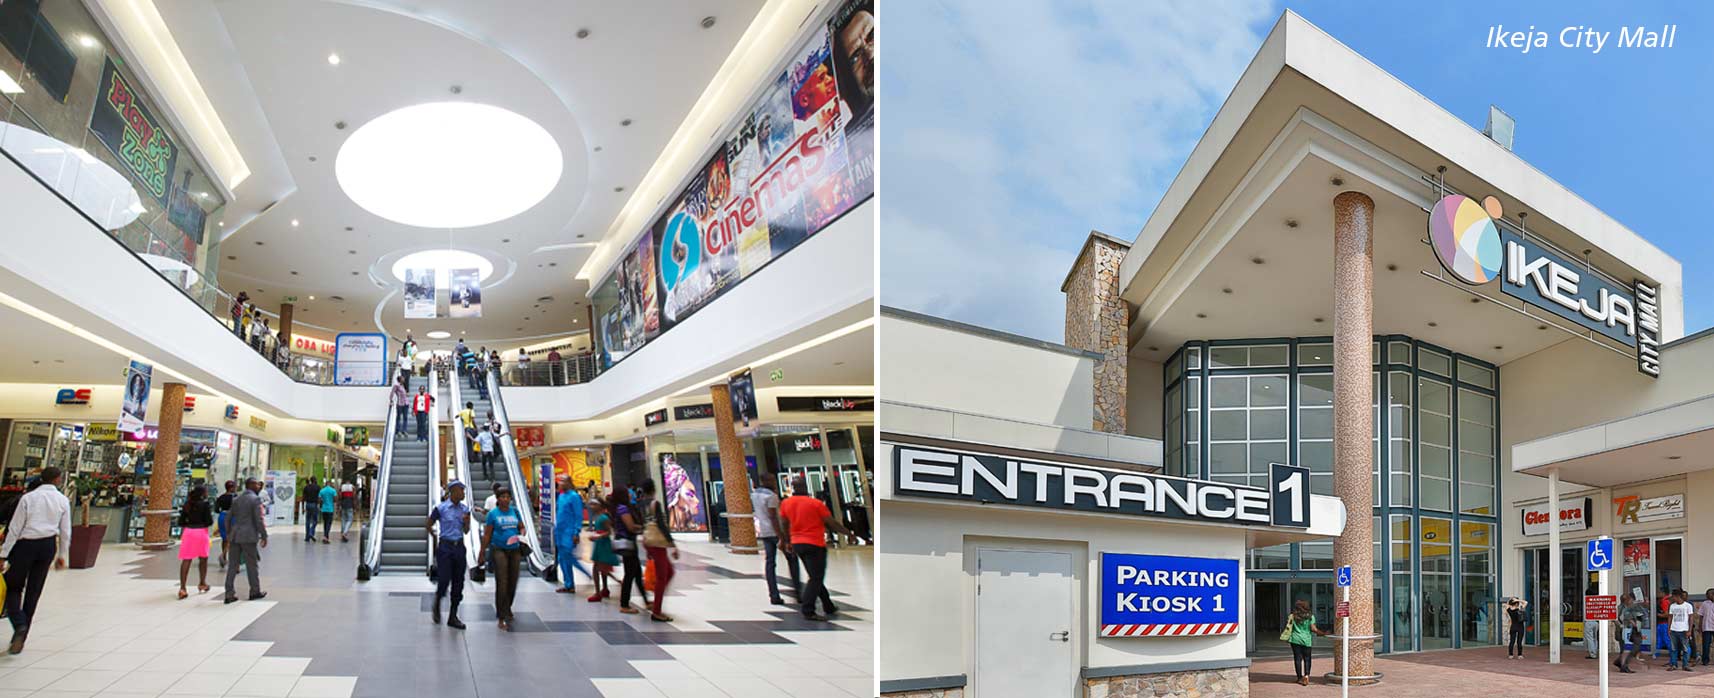 Nigeria&#8217;s US Dollar liquidity shortage is slowing down the Sale of Ikeja City Mall